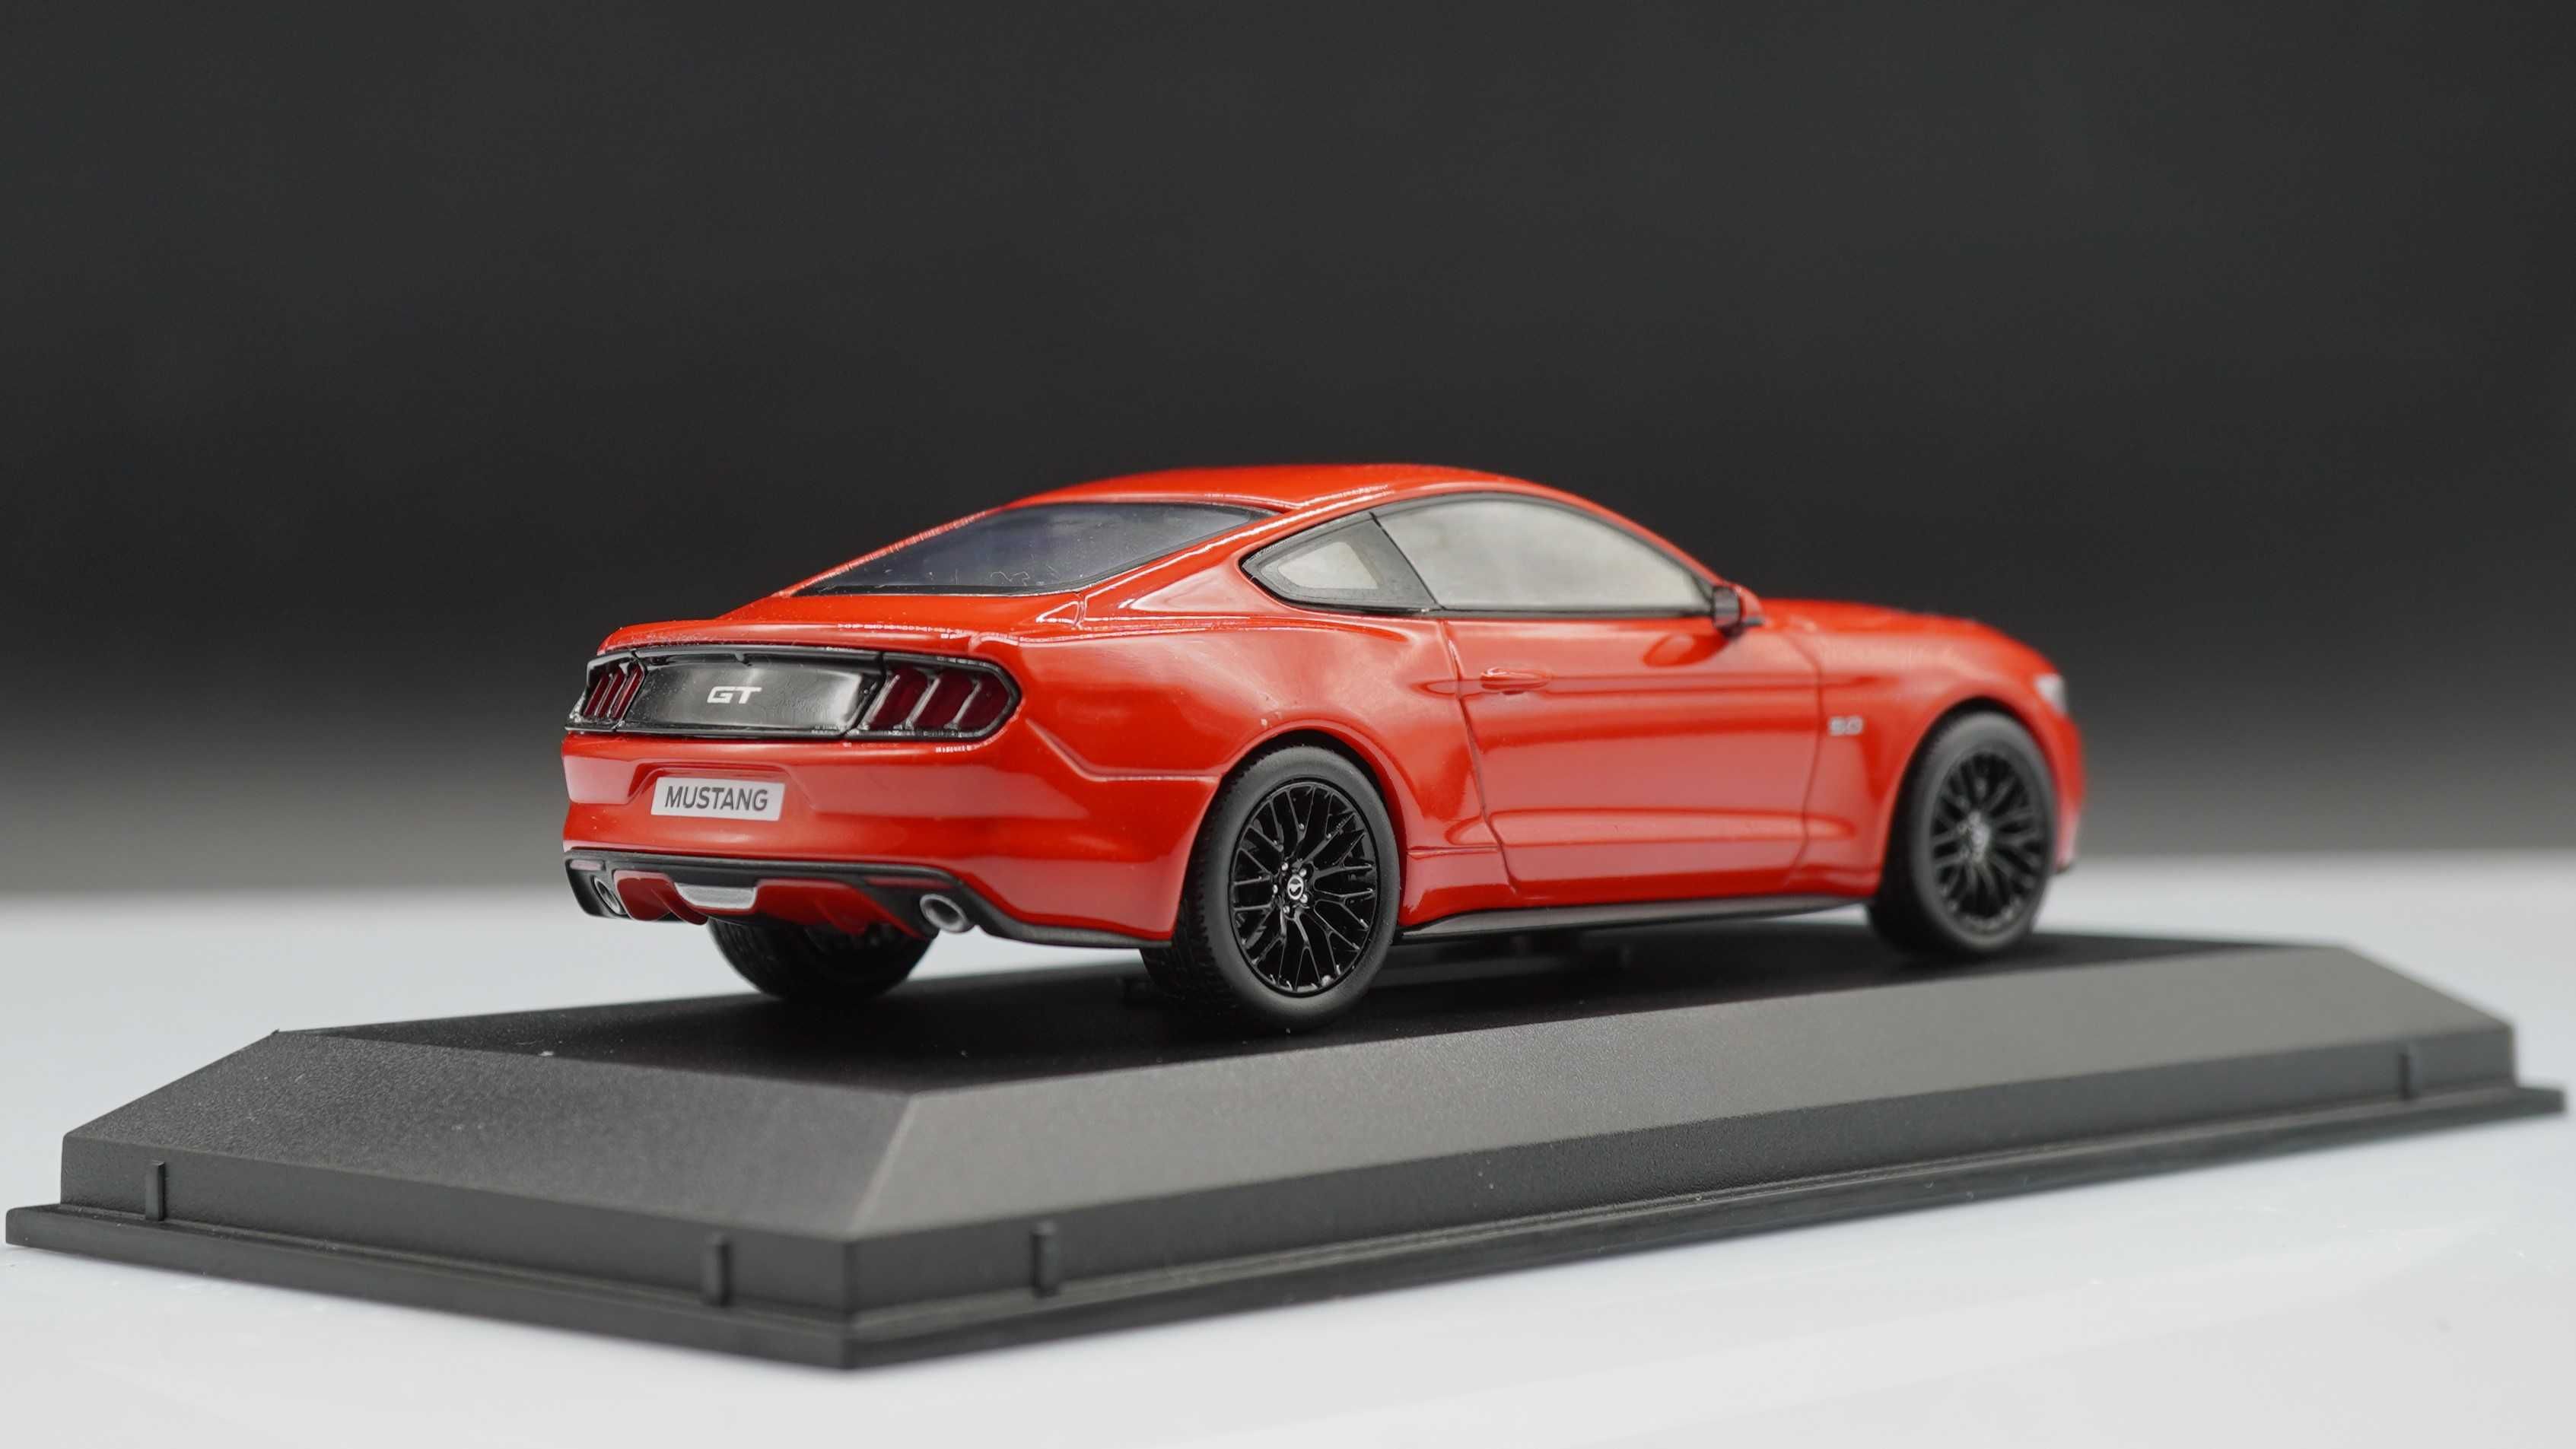 2015 Ford Mustang - Norev 1/43